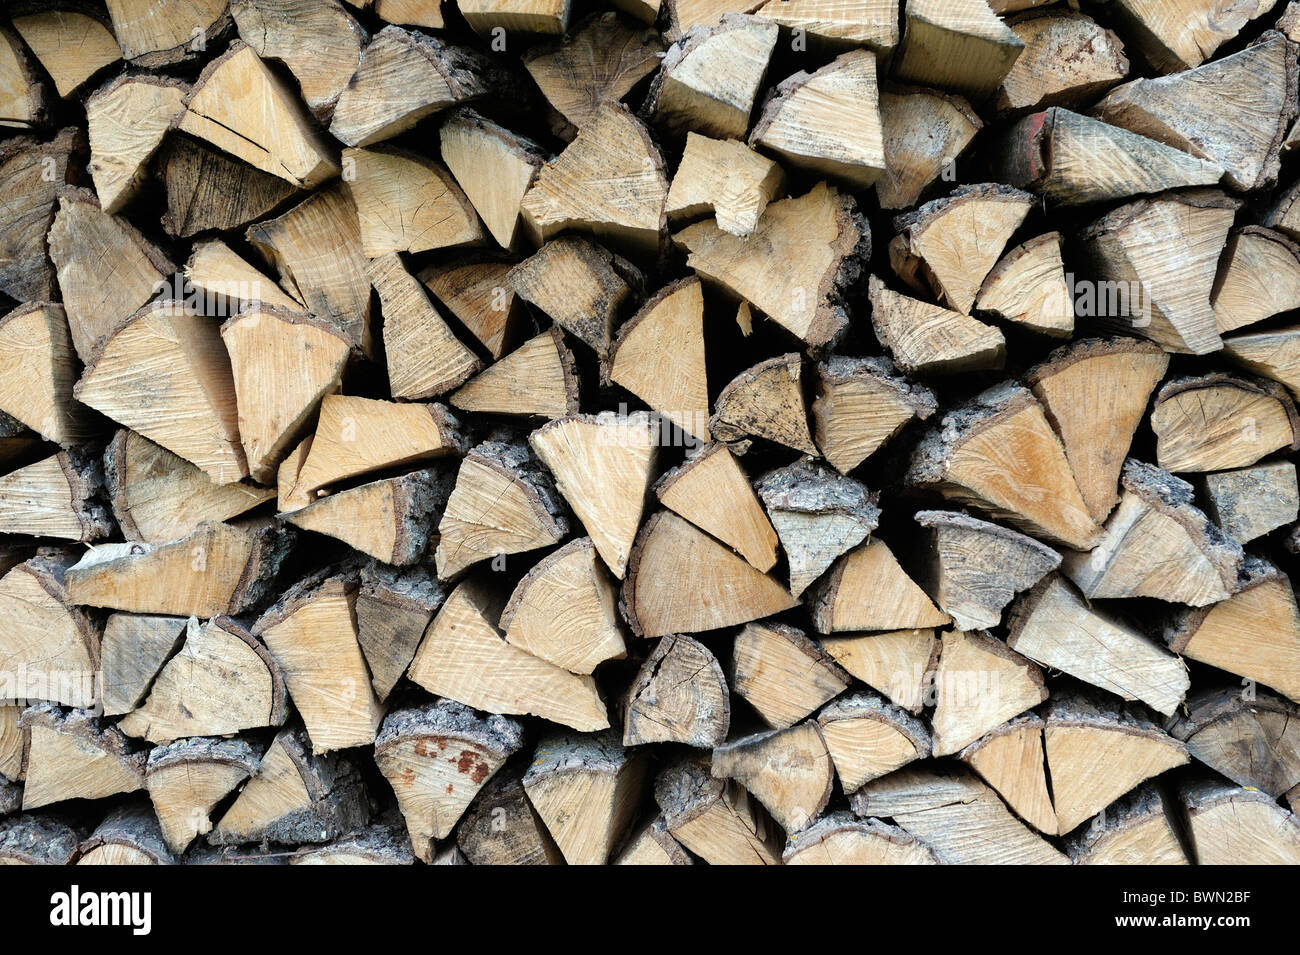 Stack pile of firewood logs for domestic fuel house fire heating Stock Photo